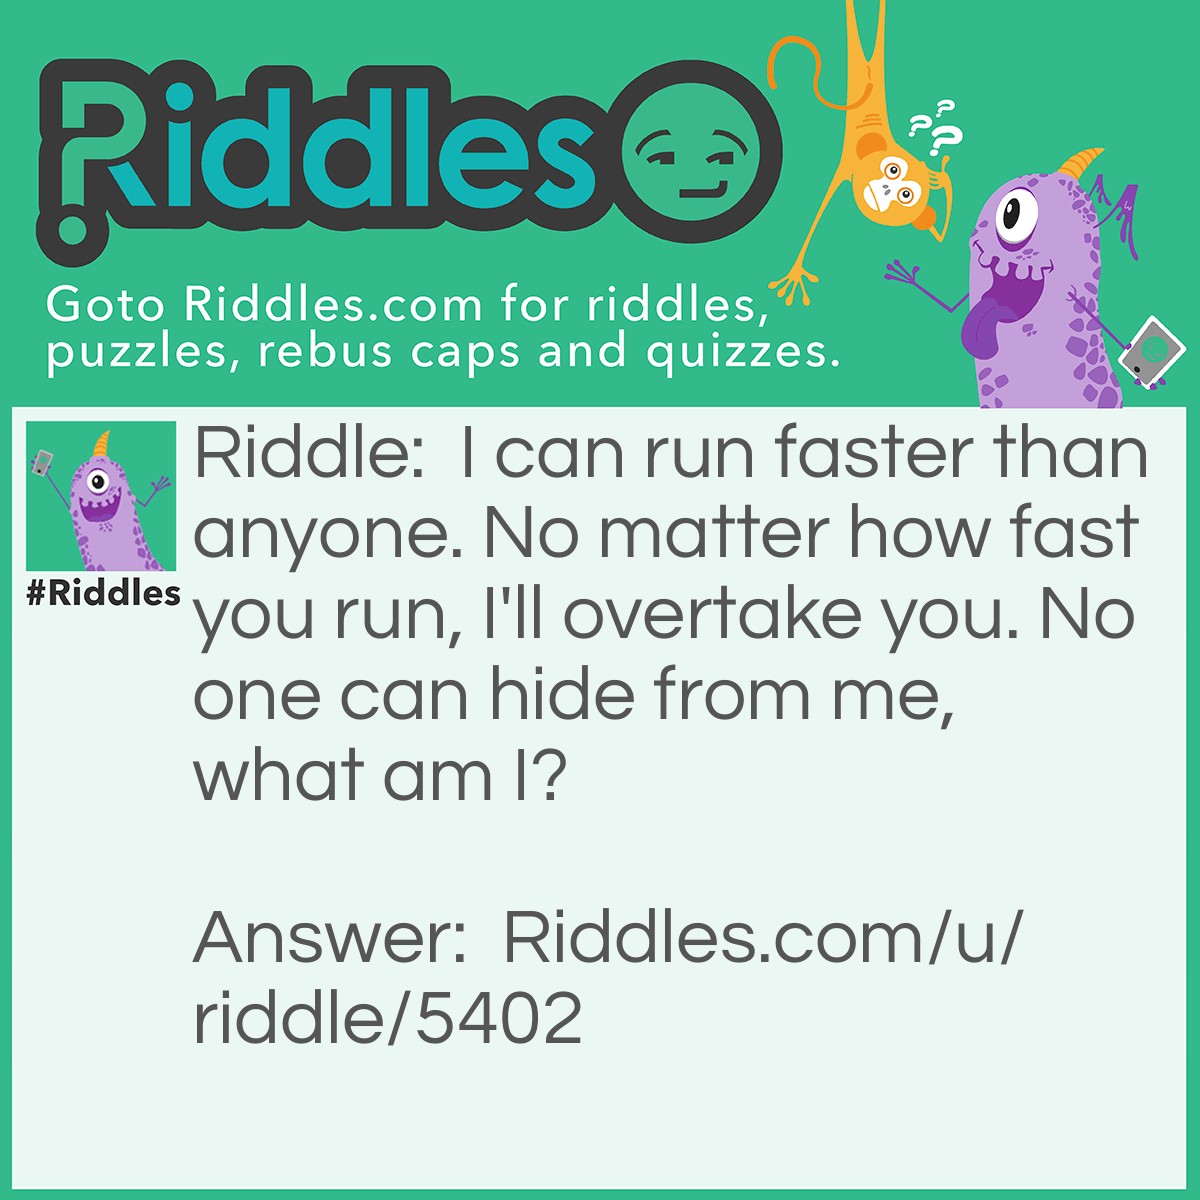 Riddle: I can run faster than anyone. No matter how fast you run, I'll overtake you. No one can hide from me, what am I? Answer: Death.